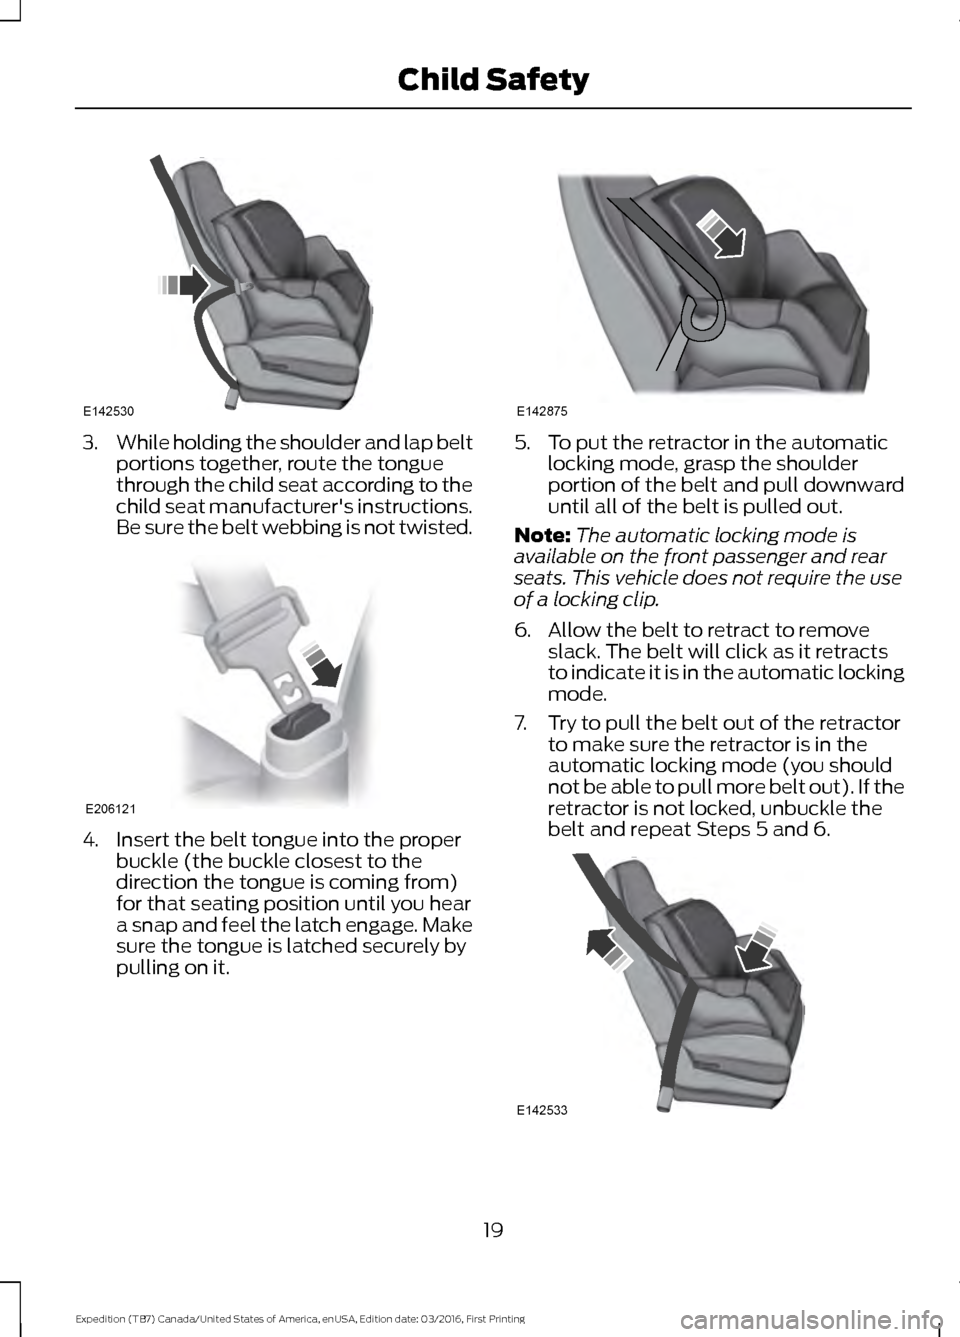 FORD EXPEDITION 2017 3.G Owners Manual 3.
While holding the shoulder and lap belt
portions together, route the tongue
through the child seat according to the
child seat manufacturers instructions.
Be sure the belt webbing is not twisted. 